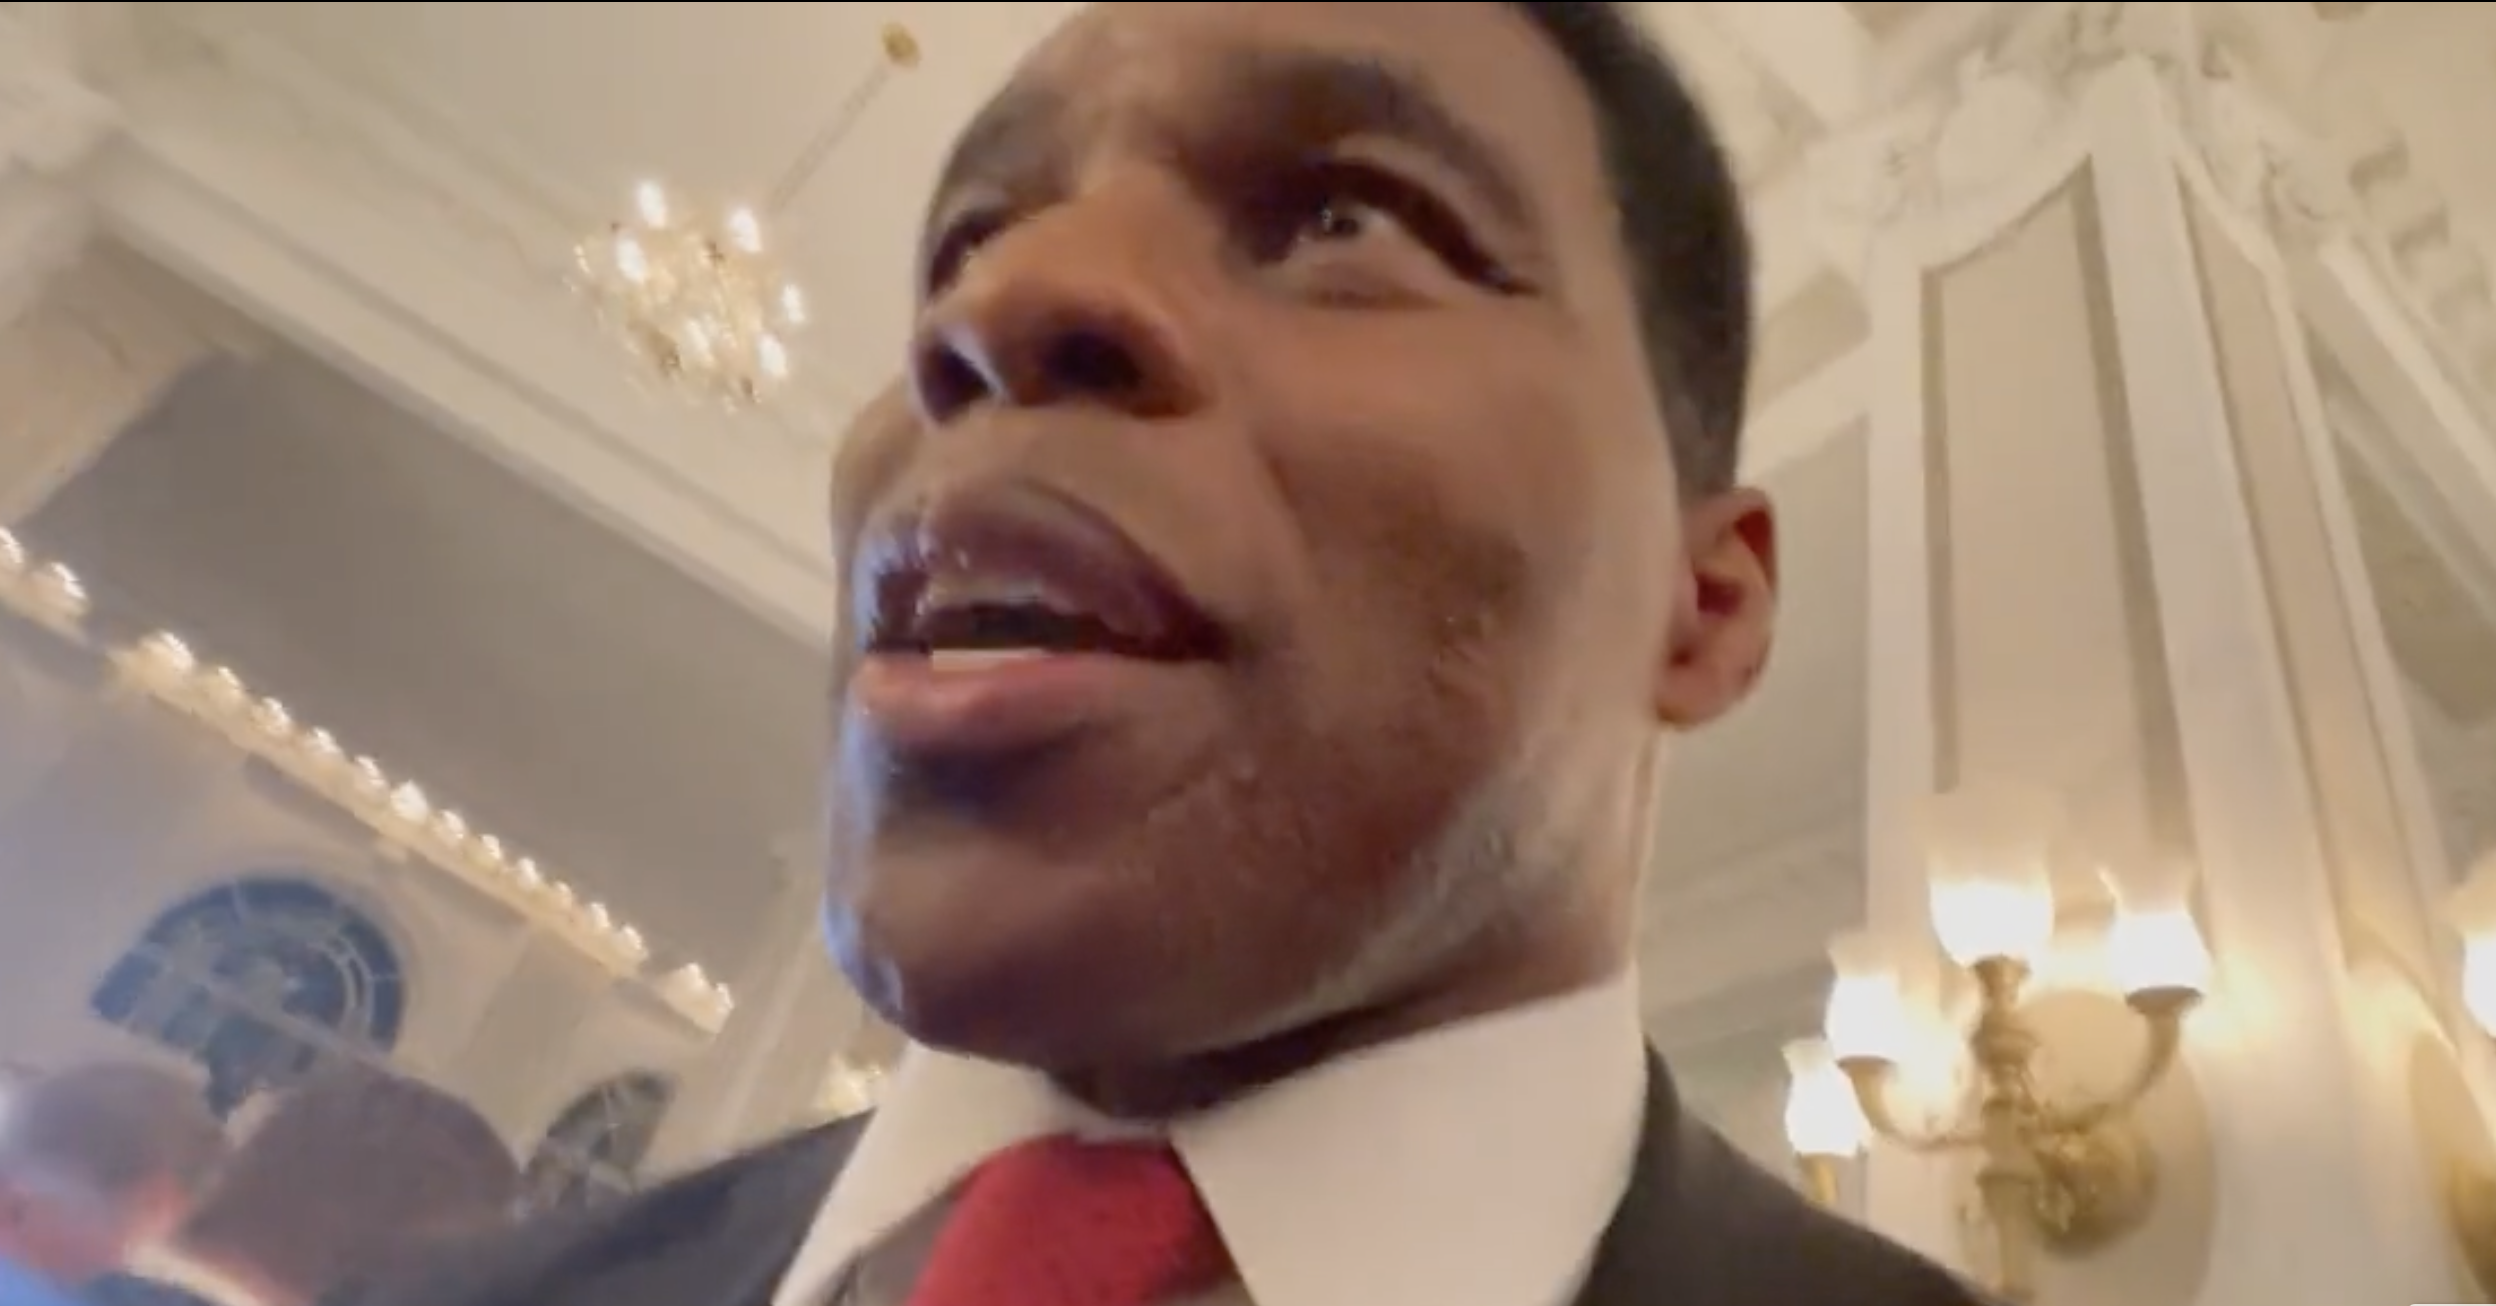 ‘What I’d Like to Do Is See It and Everything and Stuff’: Herschel Walker Awkwardly Responds to Question About Texas School Shooting